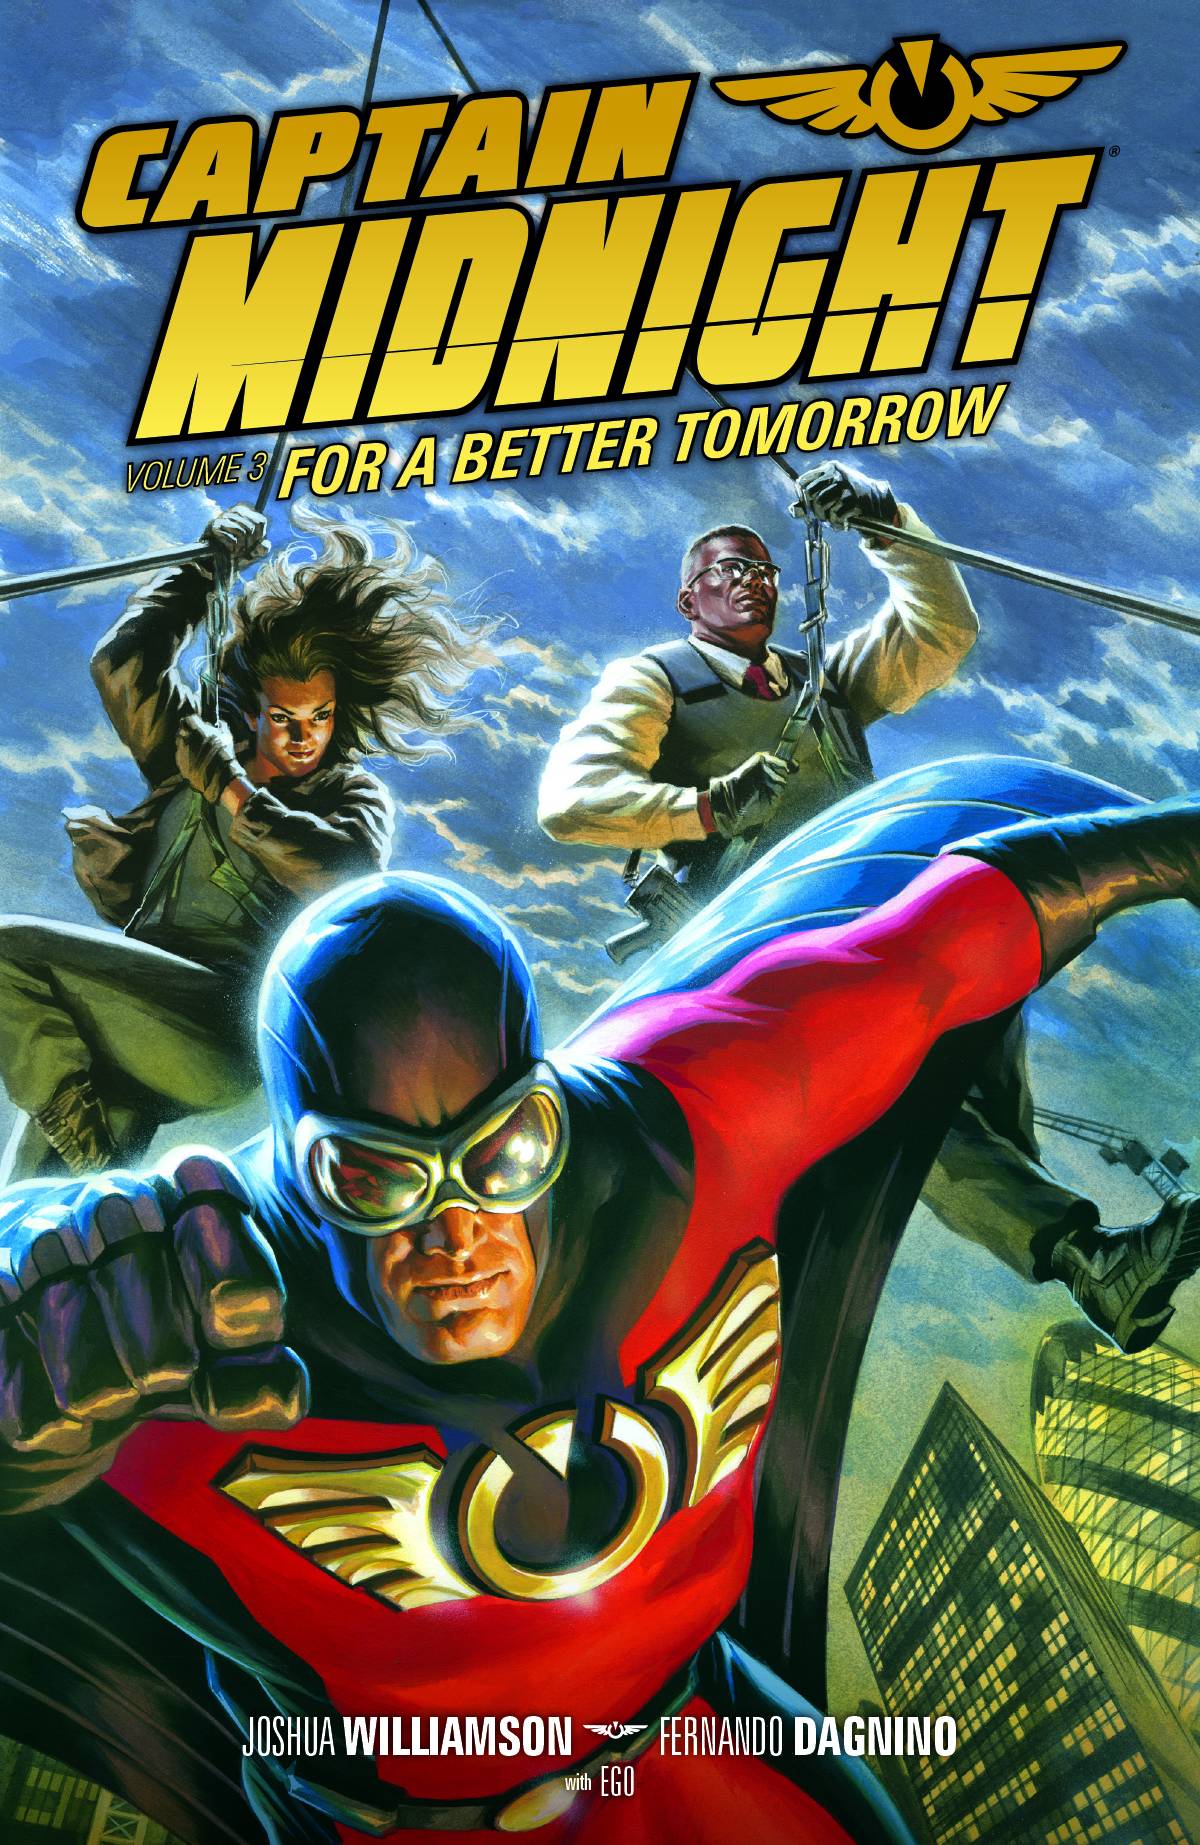 Captain Midnight Vol 03: For a Better Tomorrow TPB